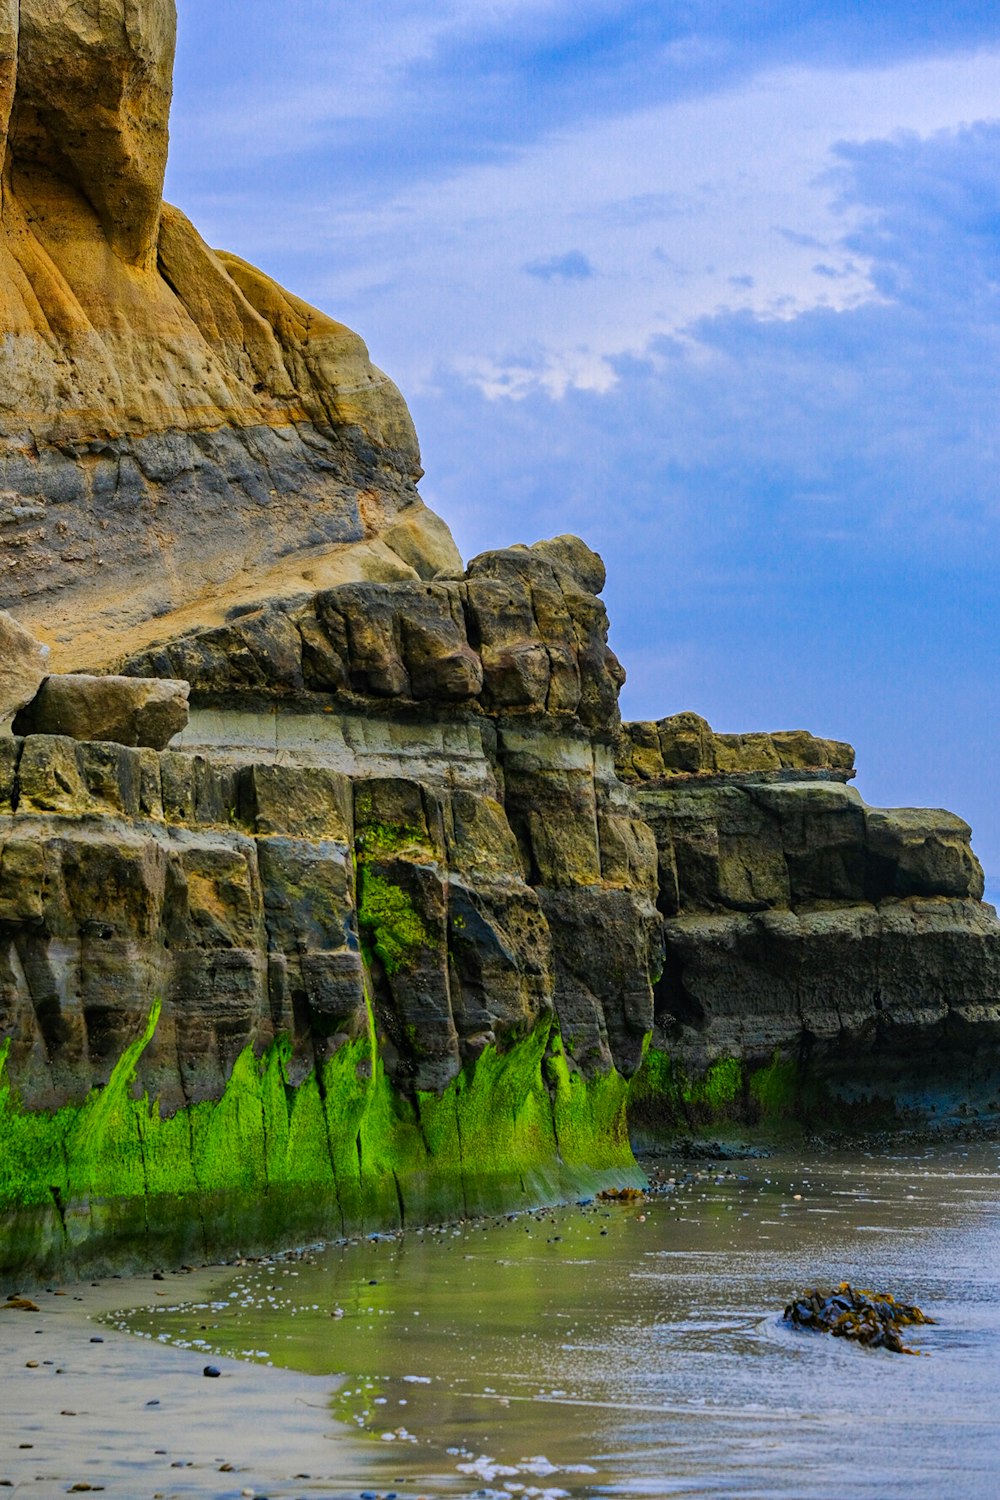 a beach with a rock formation and green algae growing on it